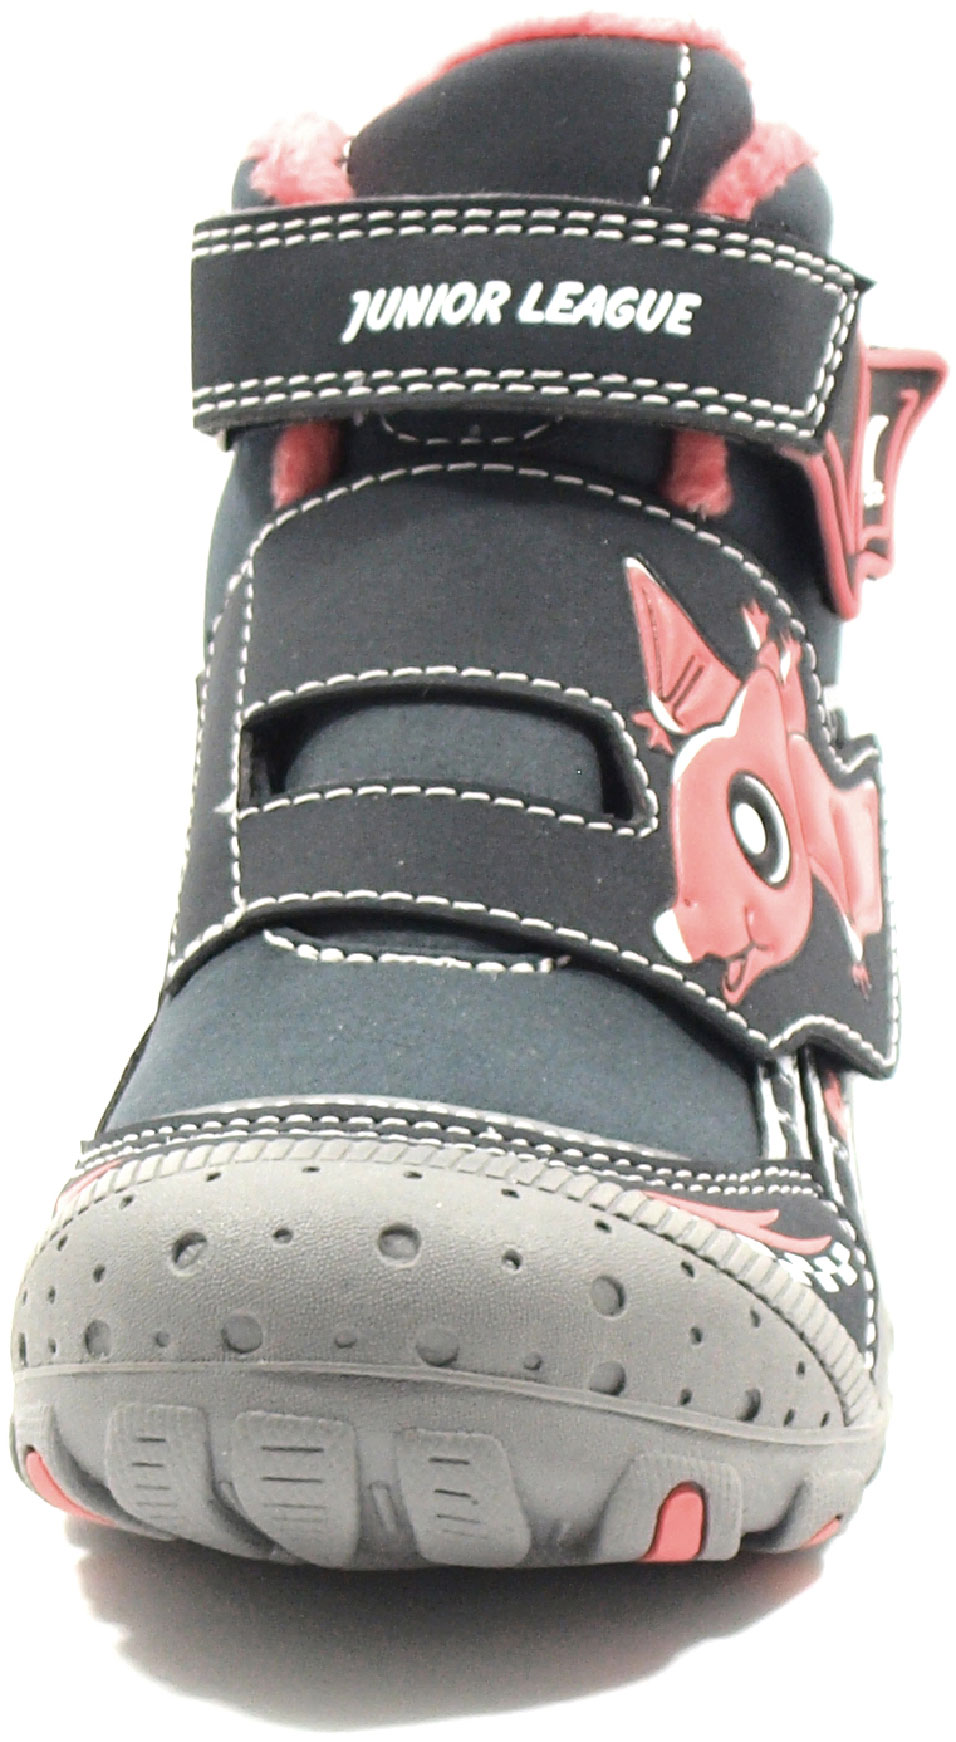 Children’s ankle boots